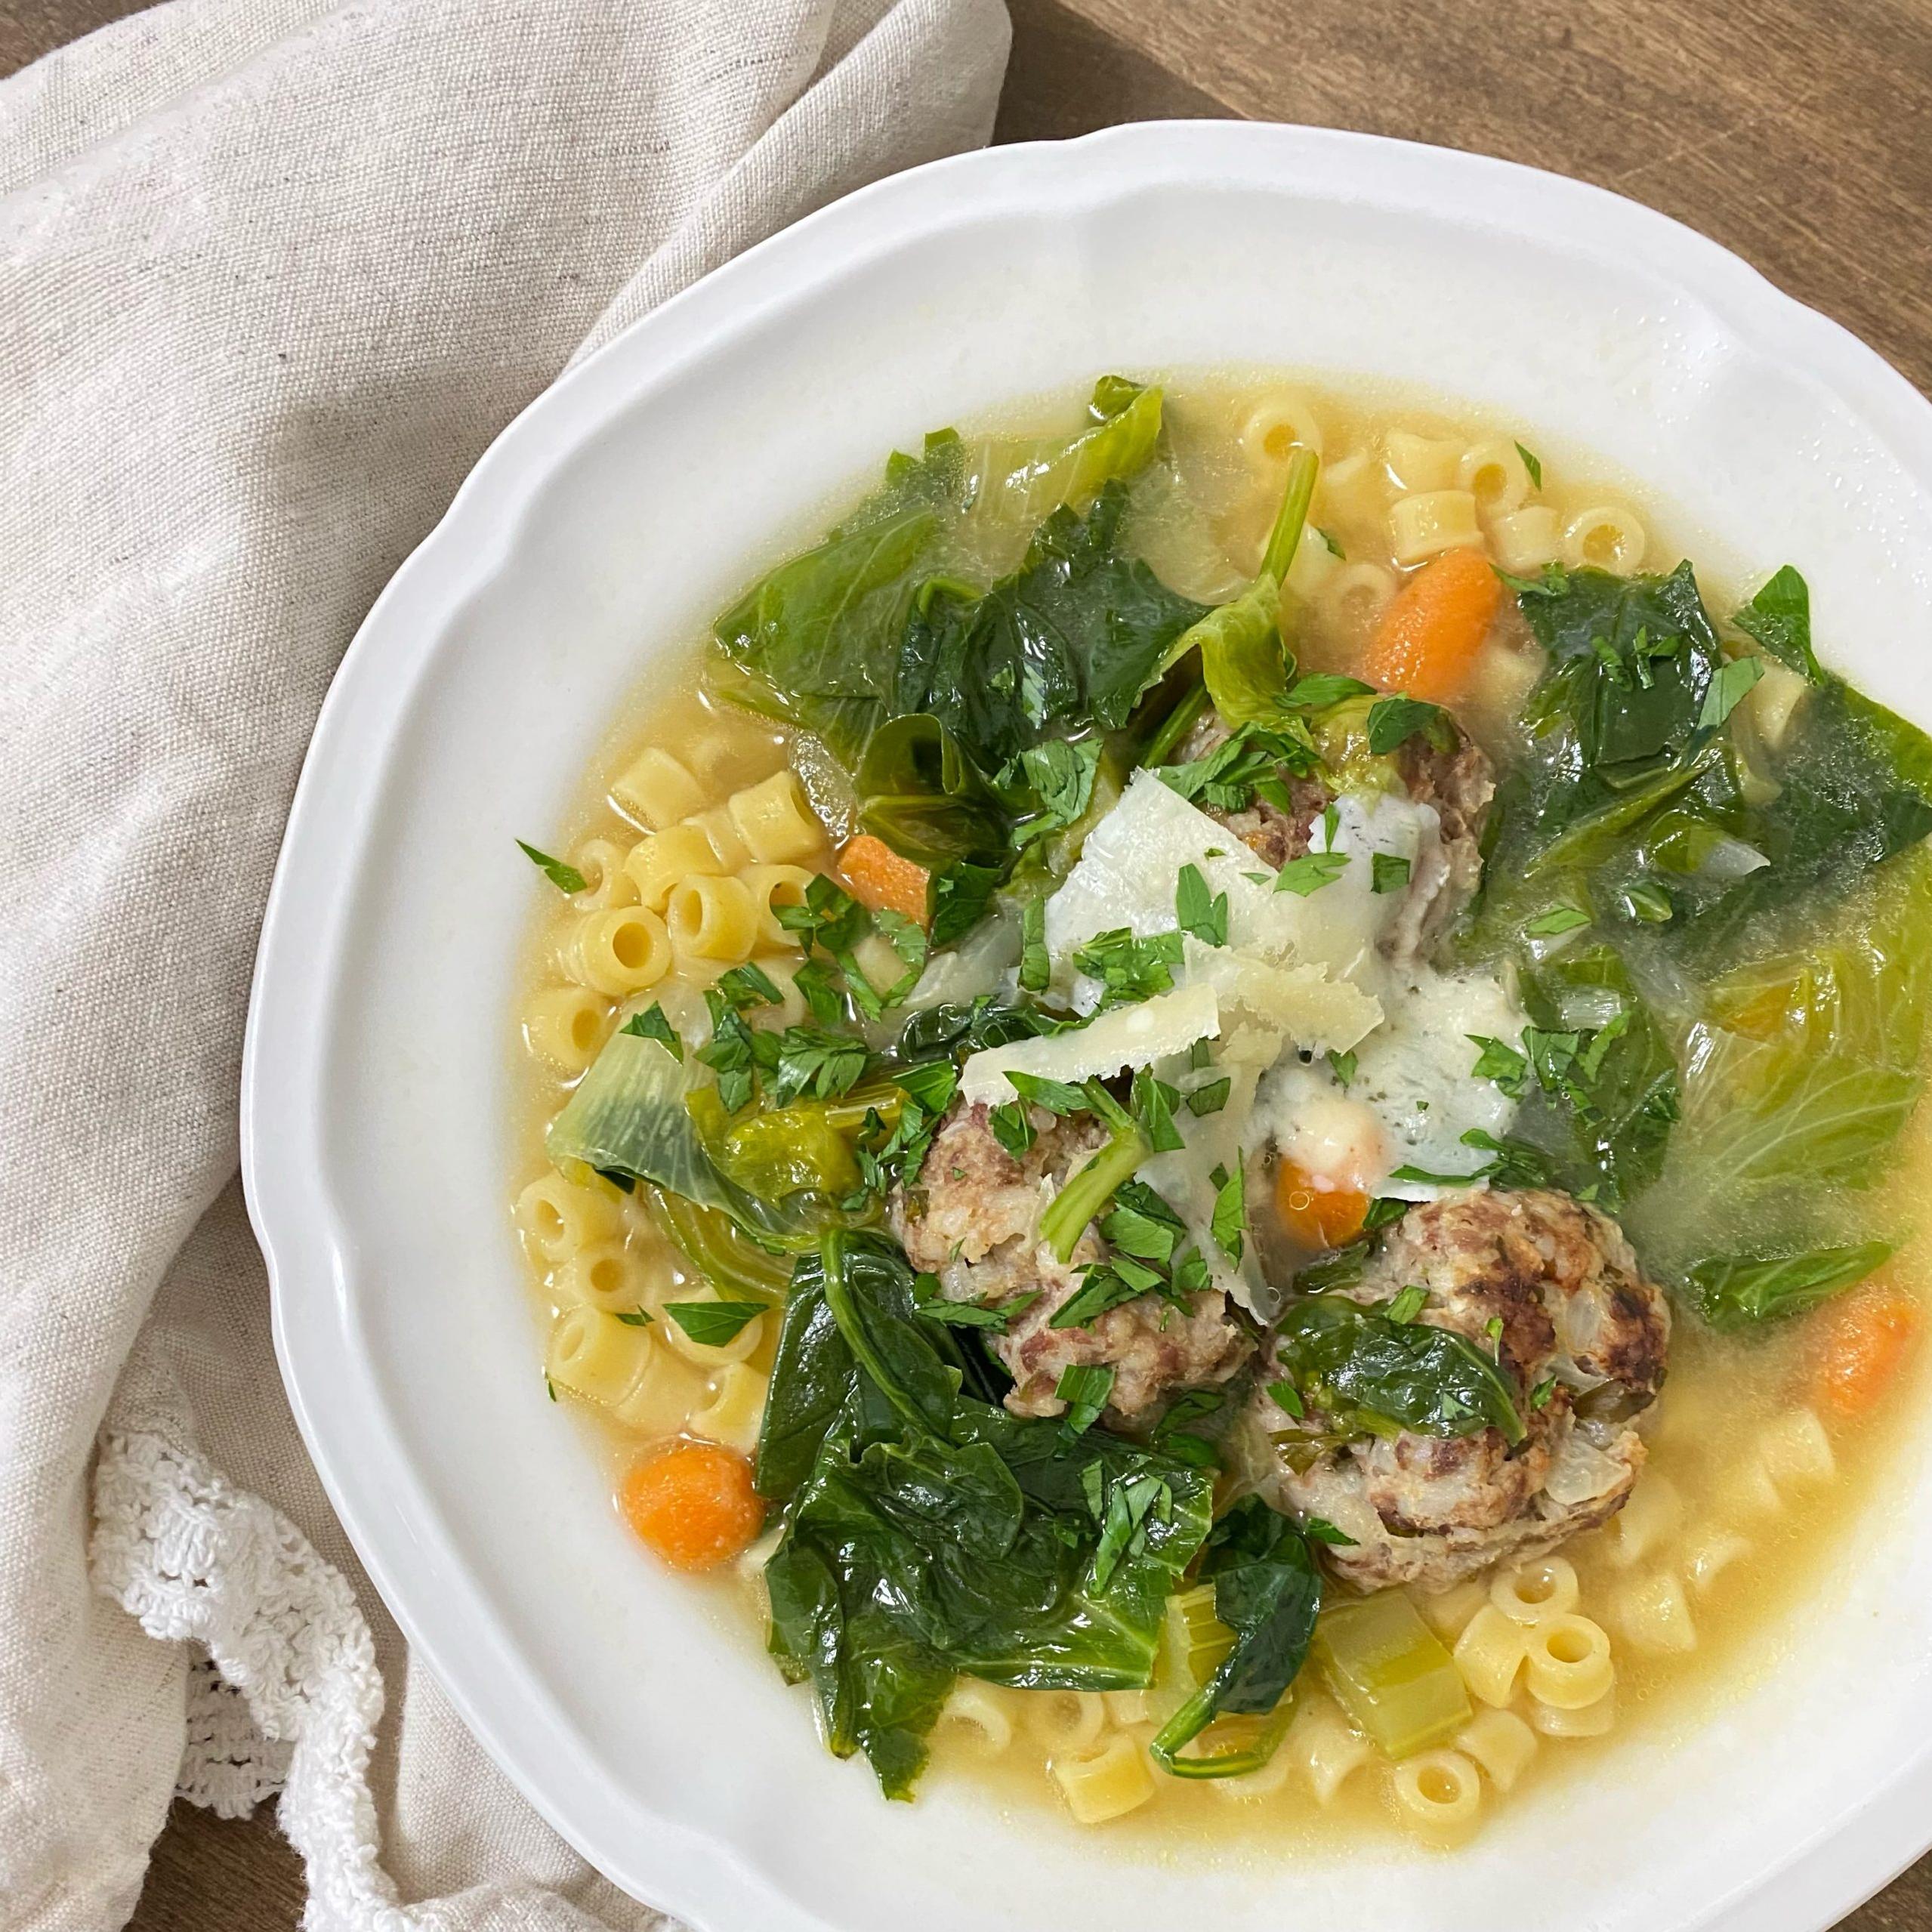  Savor every steamy spoonful of this satisfying southern twist on an Italian classic.